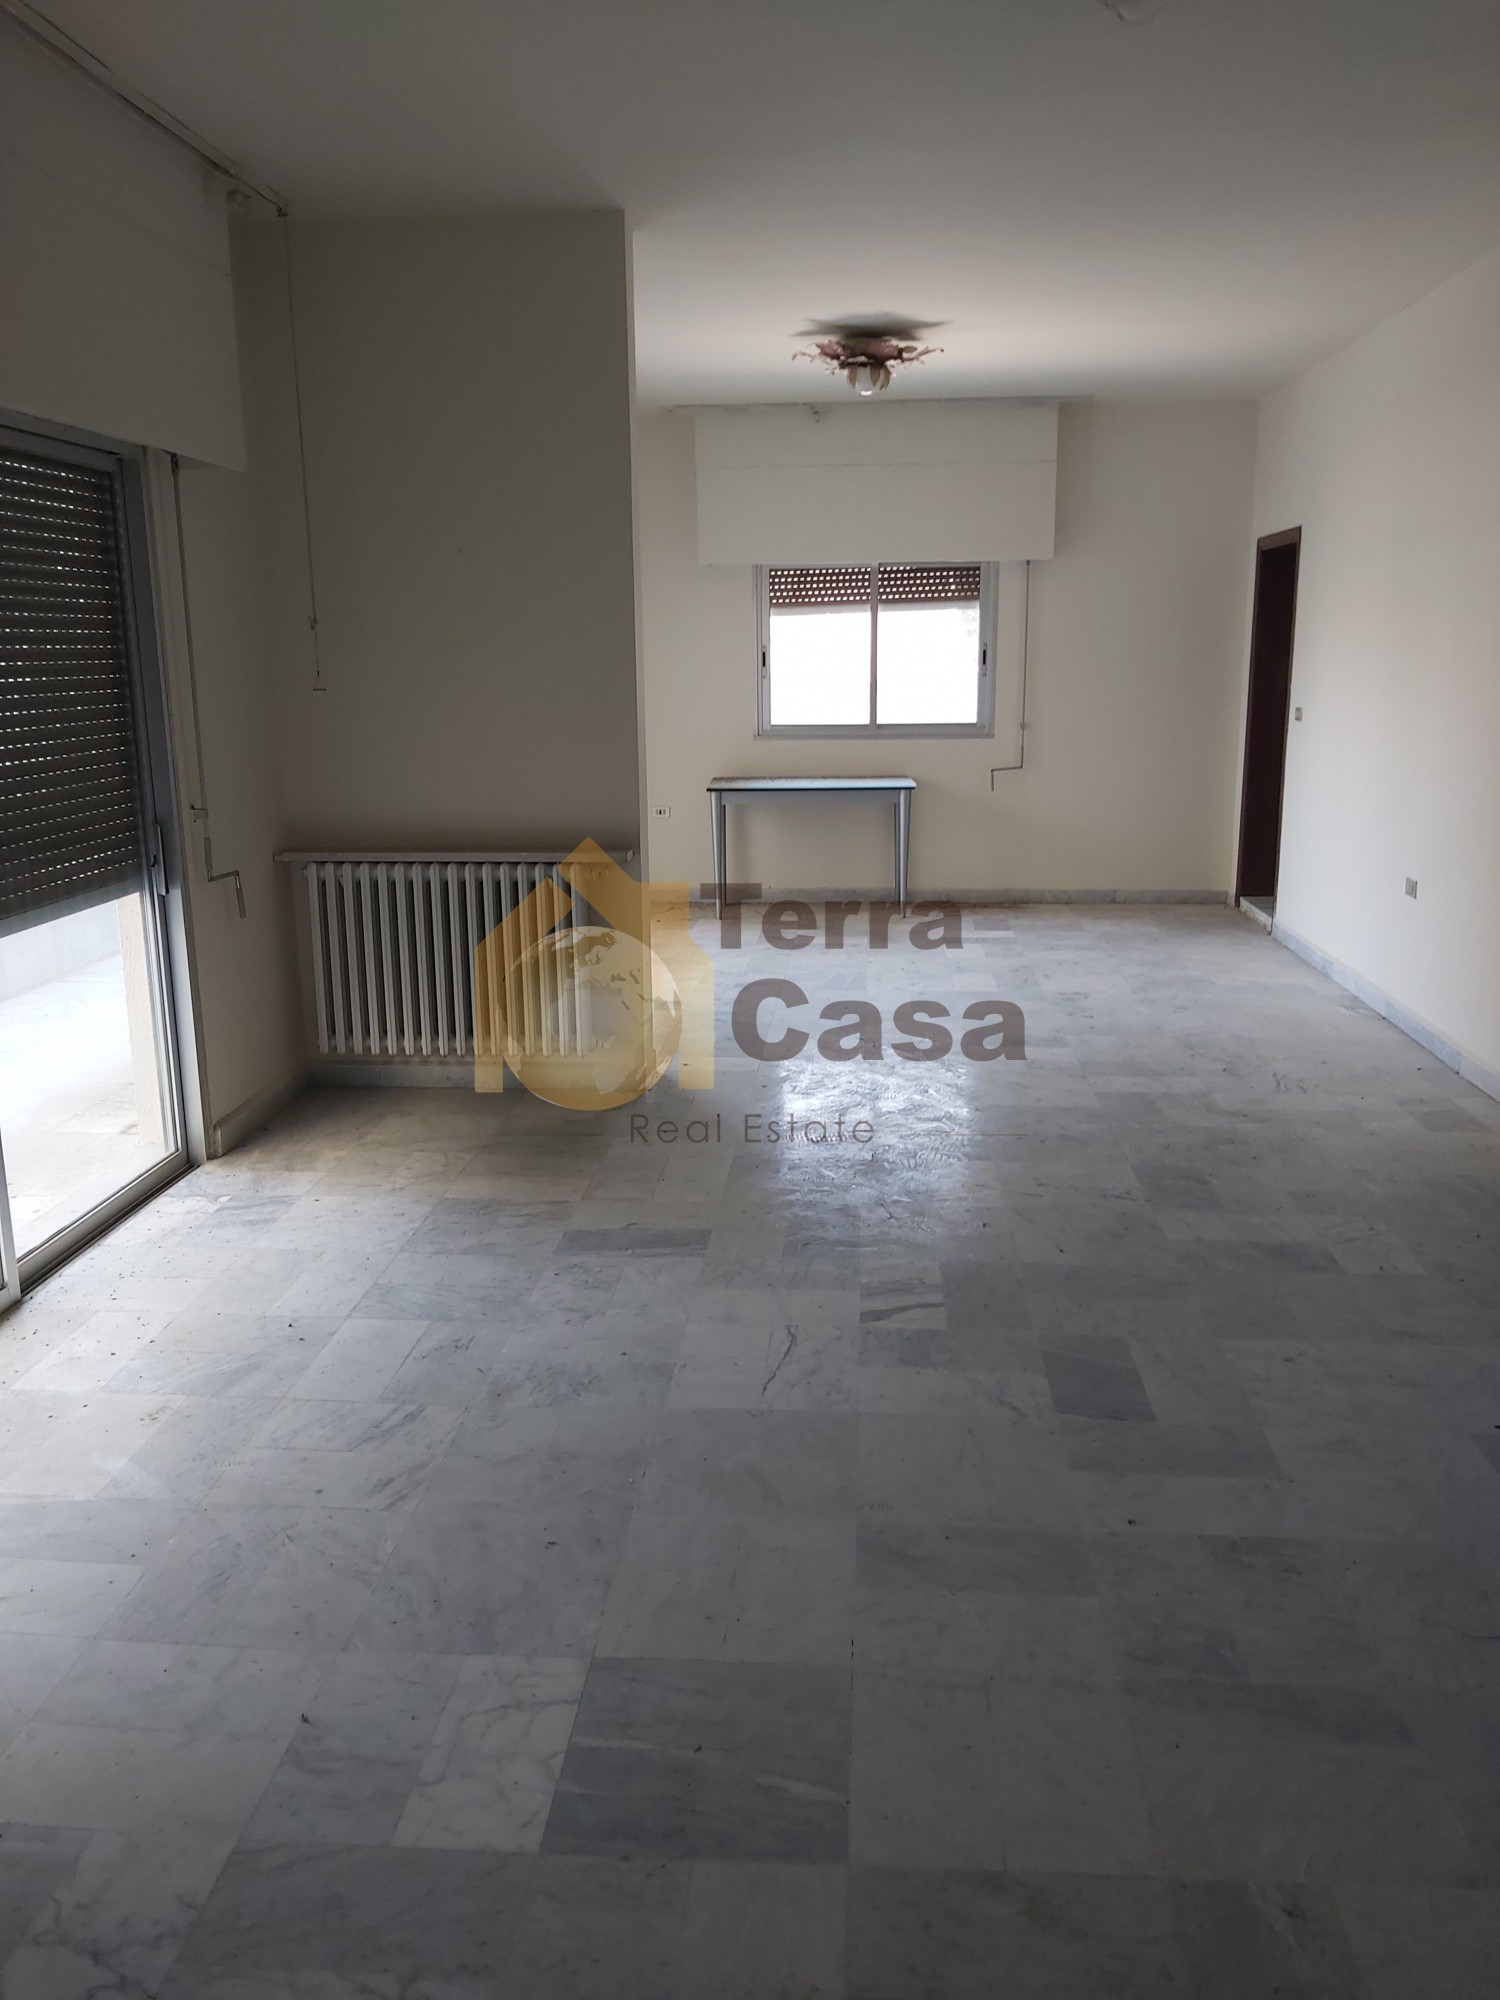 A 190sqm apartmt in Ajaltoun for 175000$ bankers check accepted